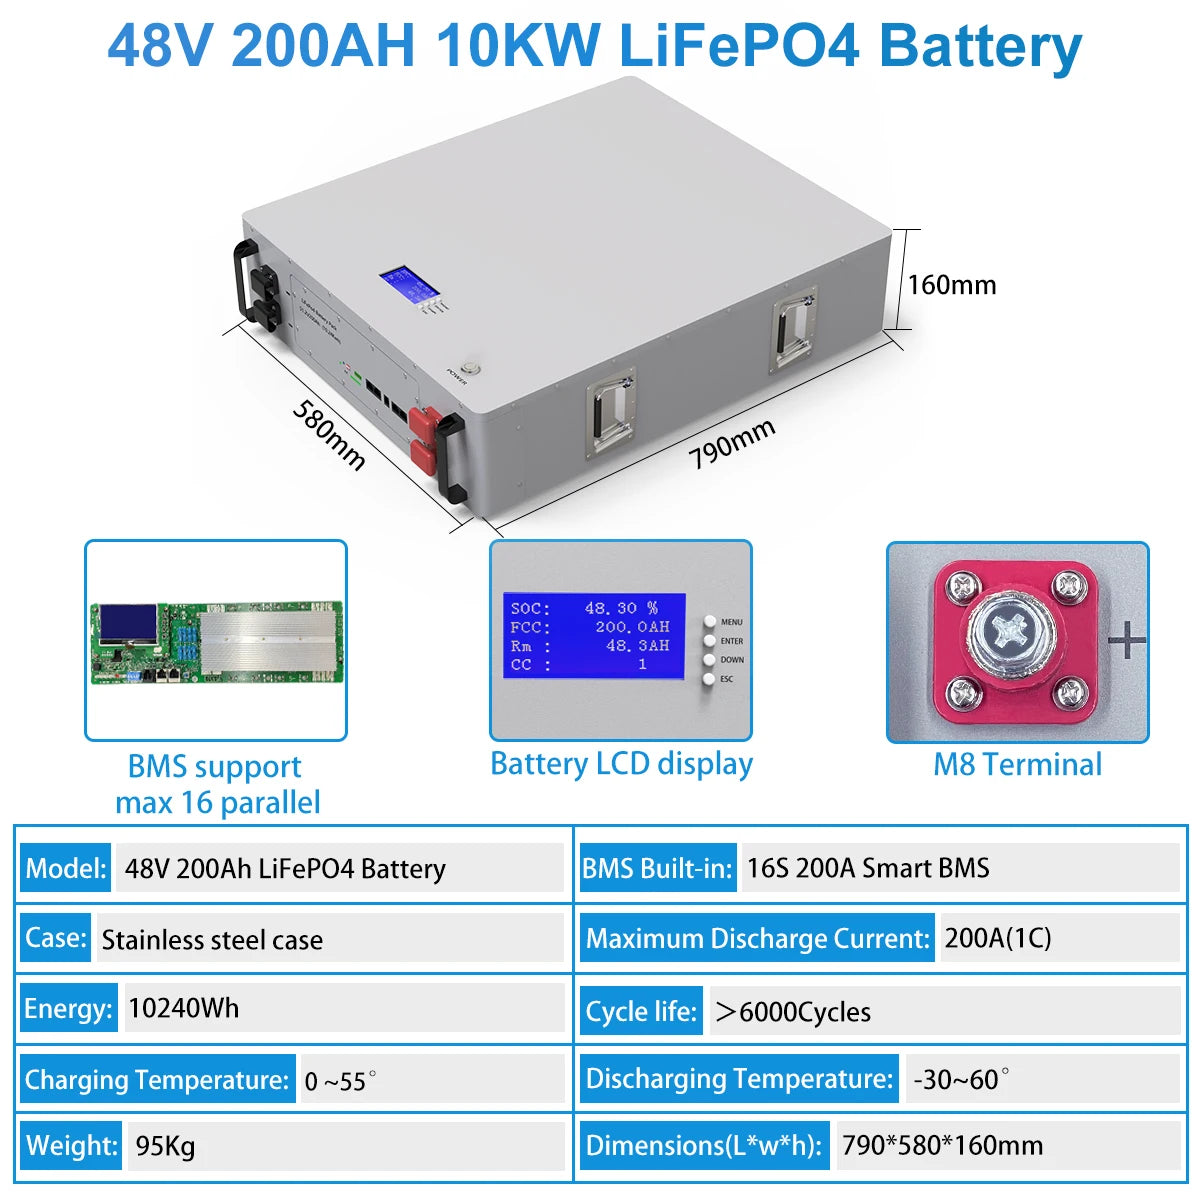 Powerwall 48V 200AH 10KW LiFePO4 Batttery Pack, Powerwall LiFePO4 battery pack for off-grid/on-grid solar applications, featuring high capacity and cycle life.